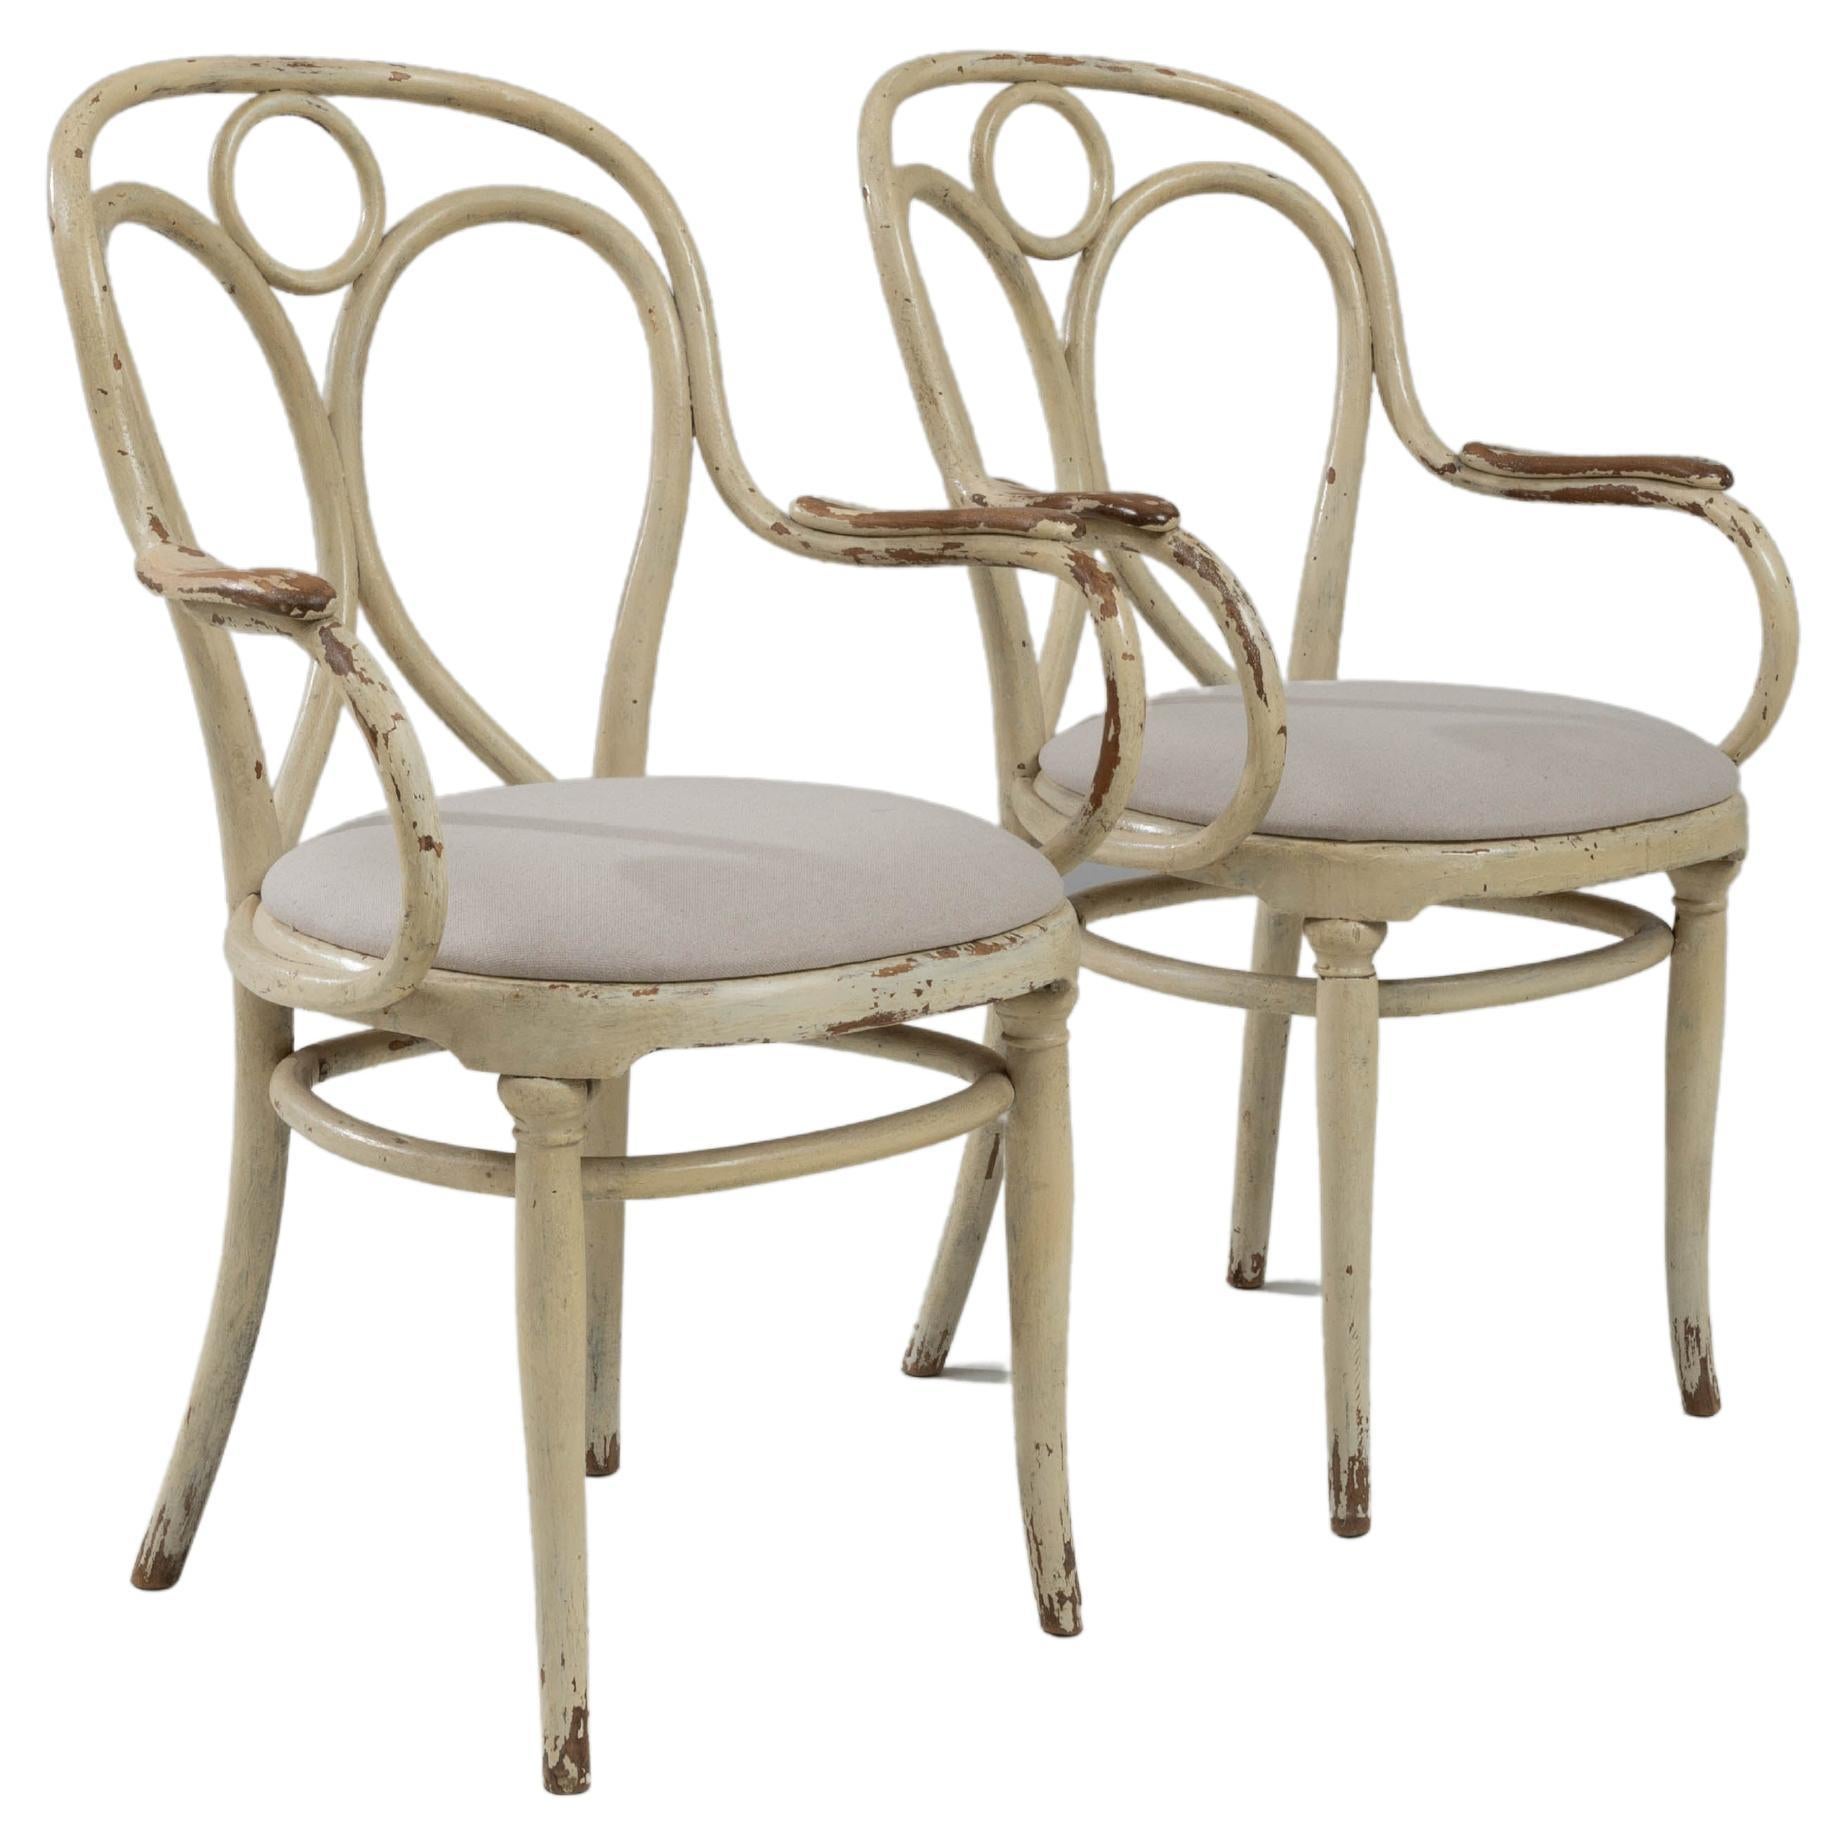 1900s Austrian Wooden Chairs, a Pair For Sale